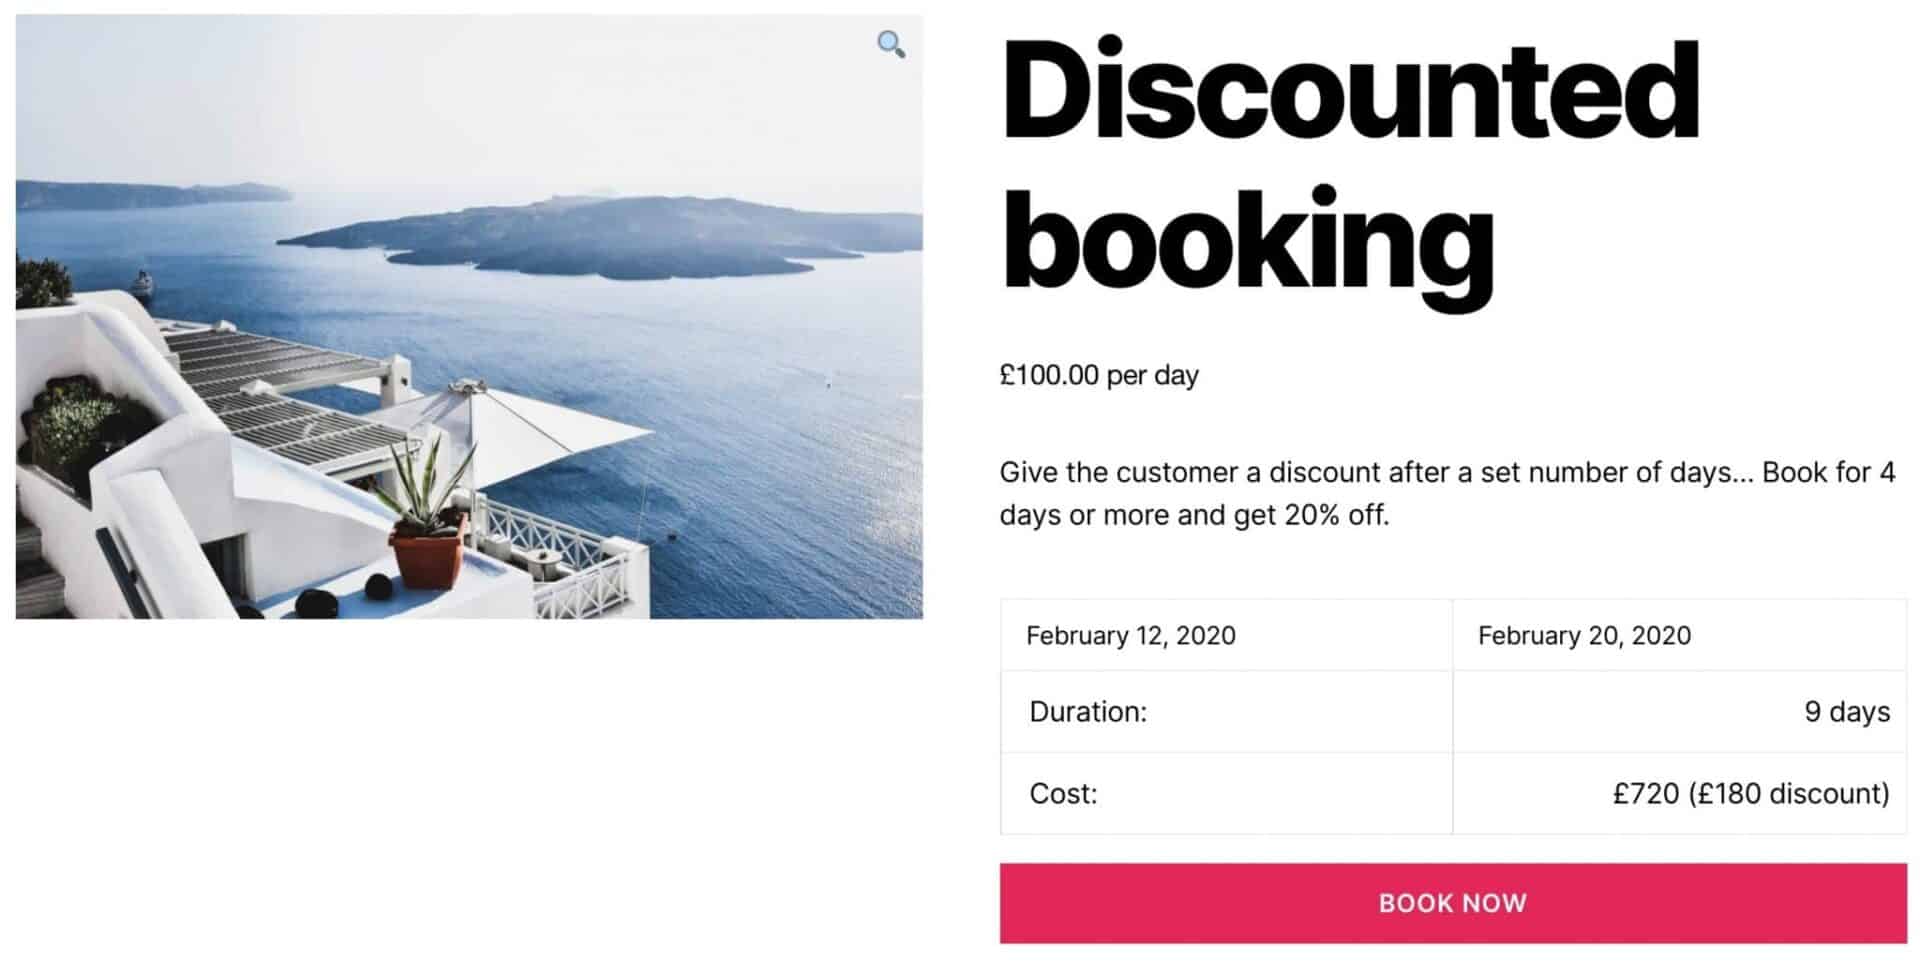 WooCommerce bookable product with discount